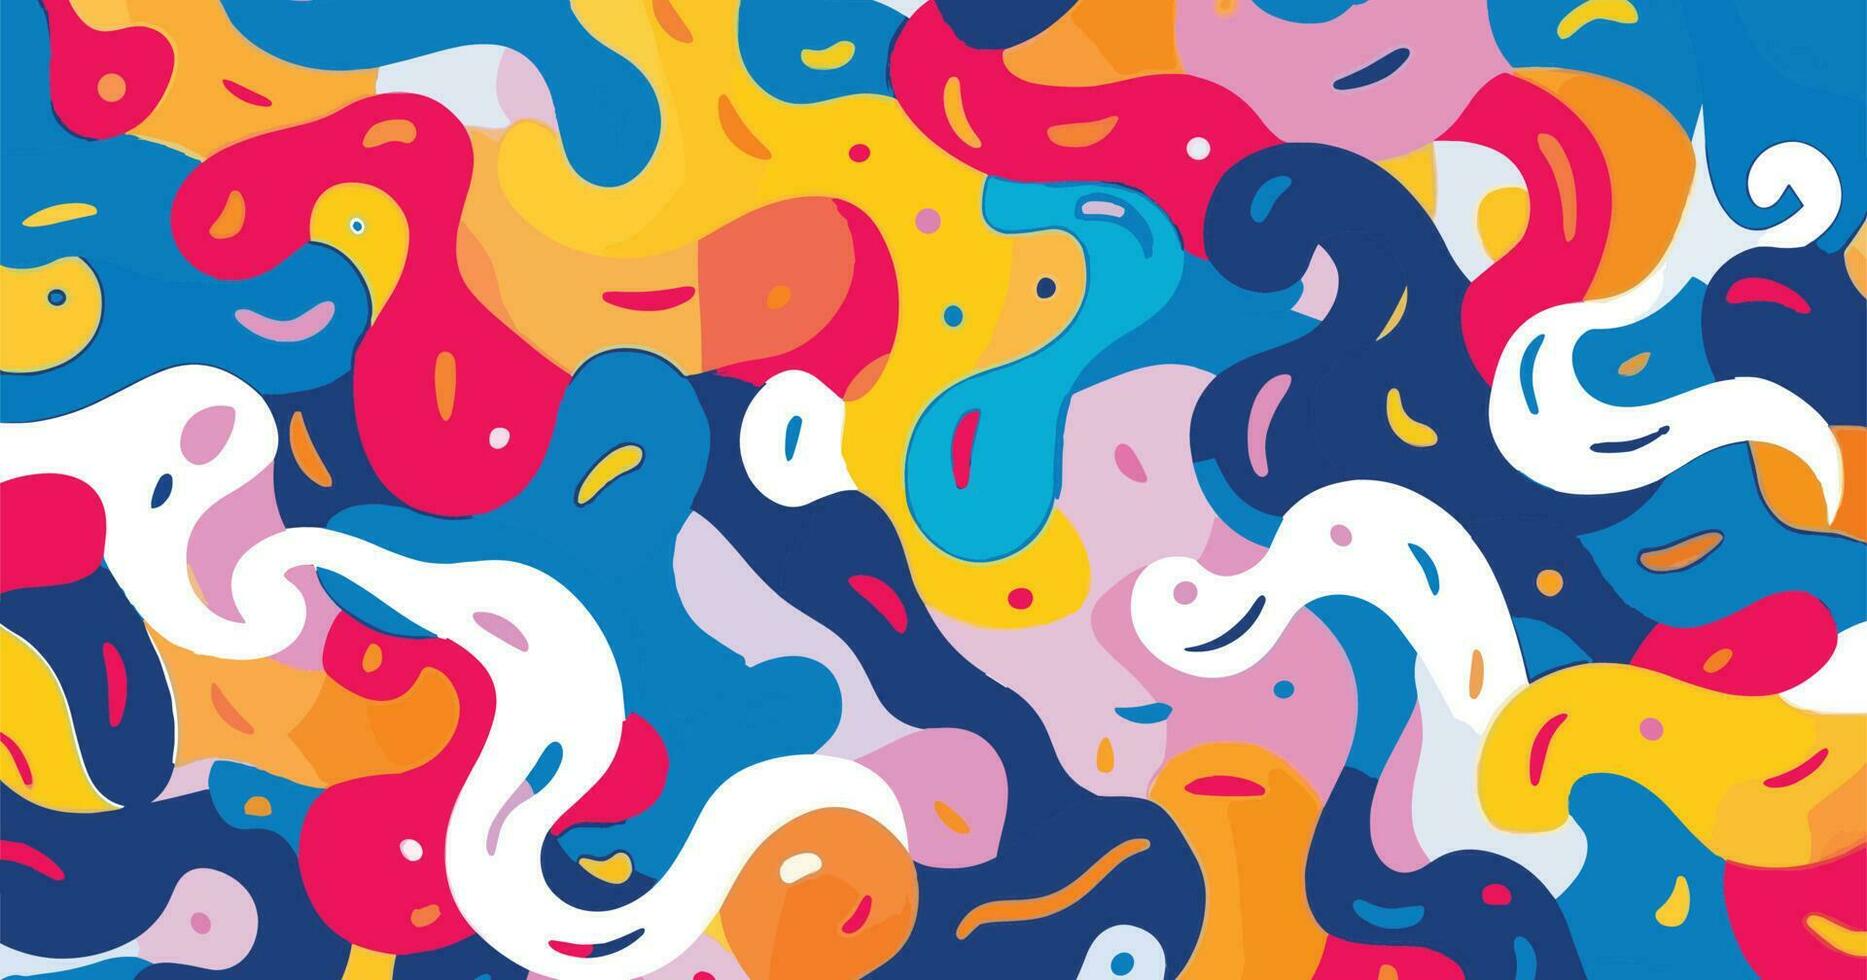 rainbows colored pattern seamless pattern for commercial and fashion design, in the style of free-flowing lines, jean arp, simplified figures, carnivalcore, squiggly line style, memphis design vector